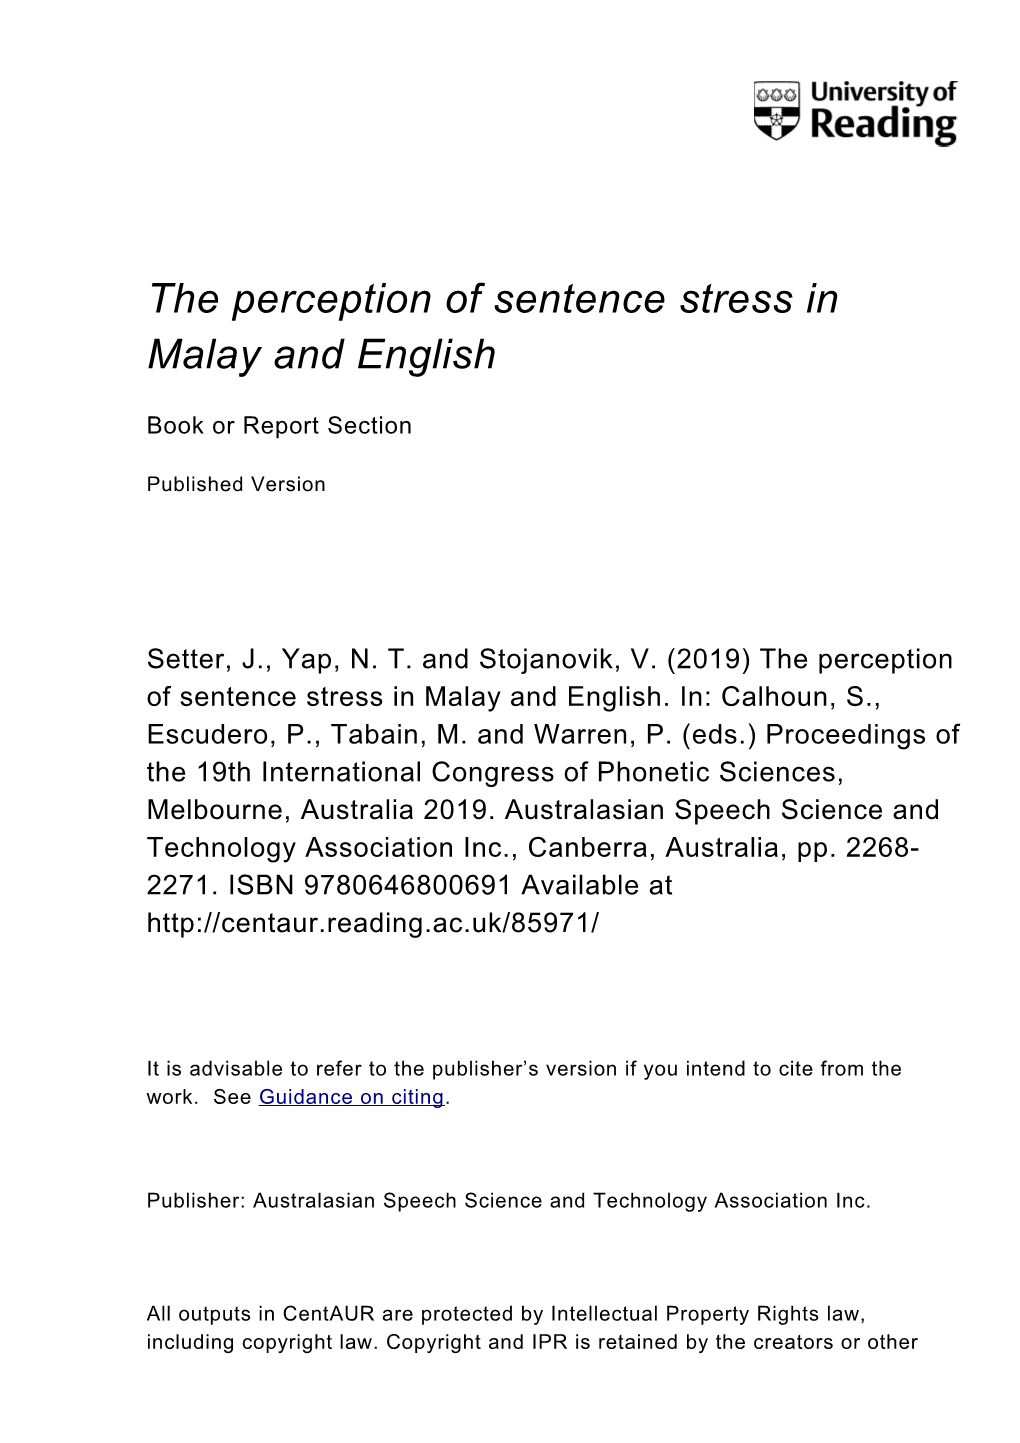 The Perception of Sentence Stress in Malay and English